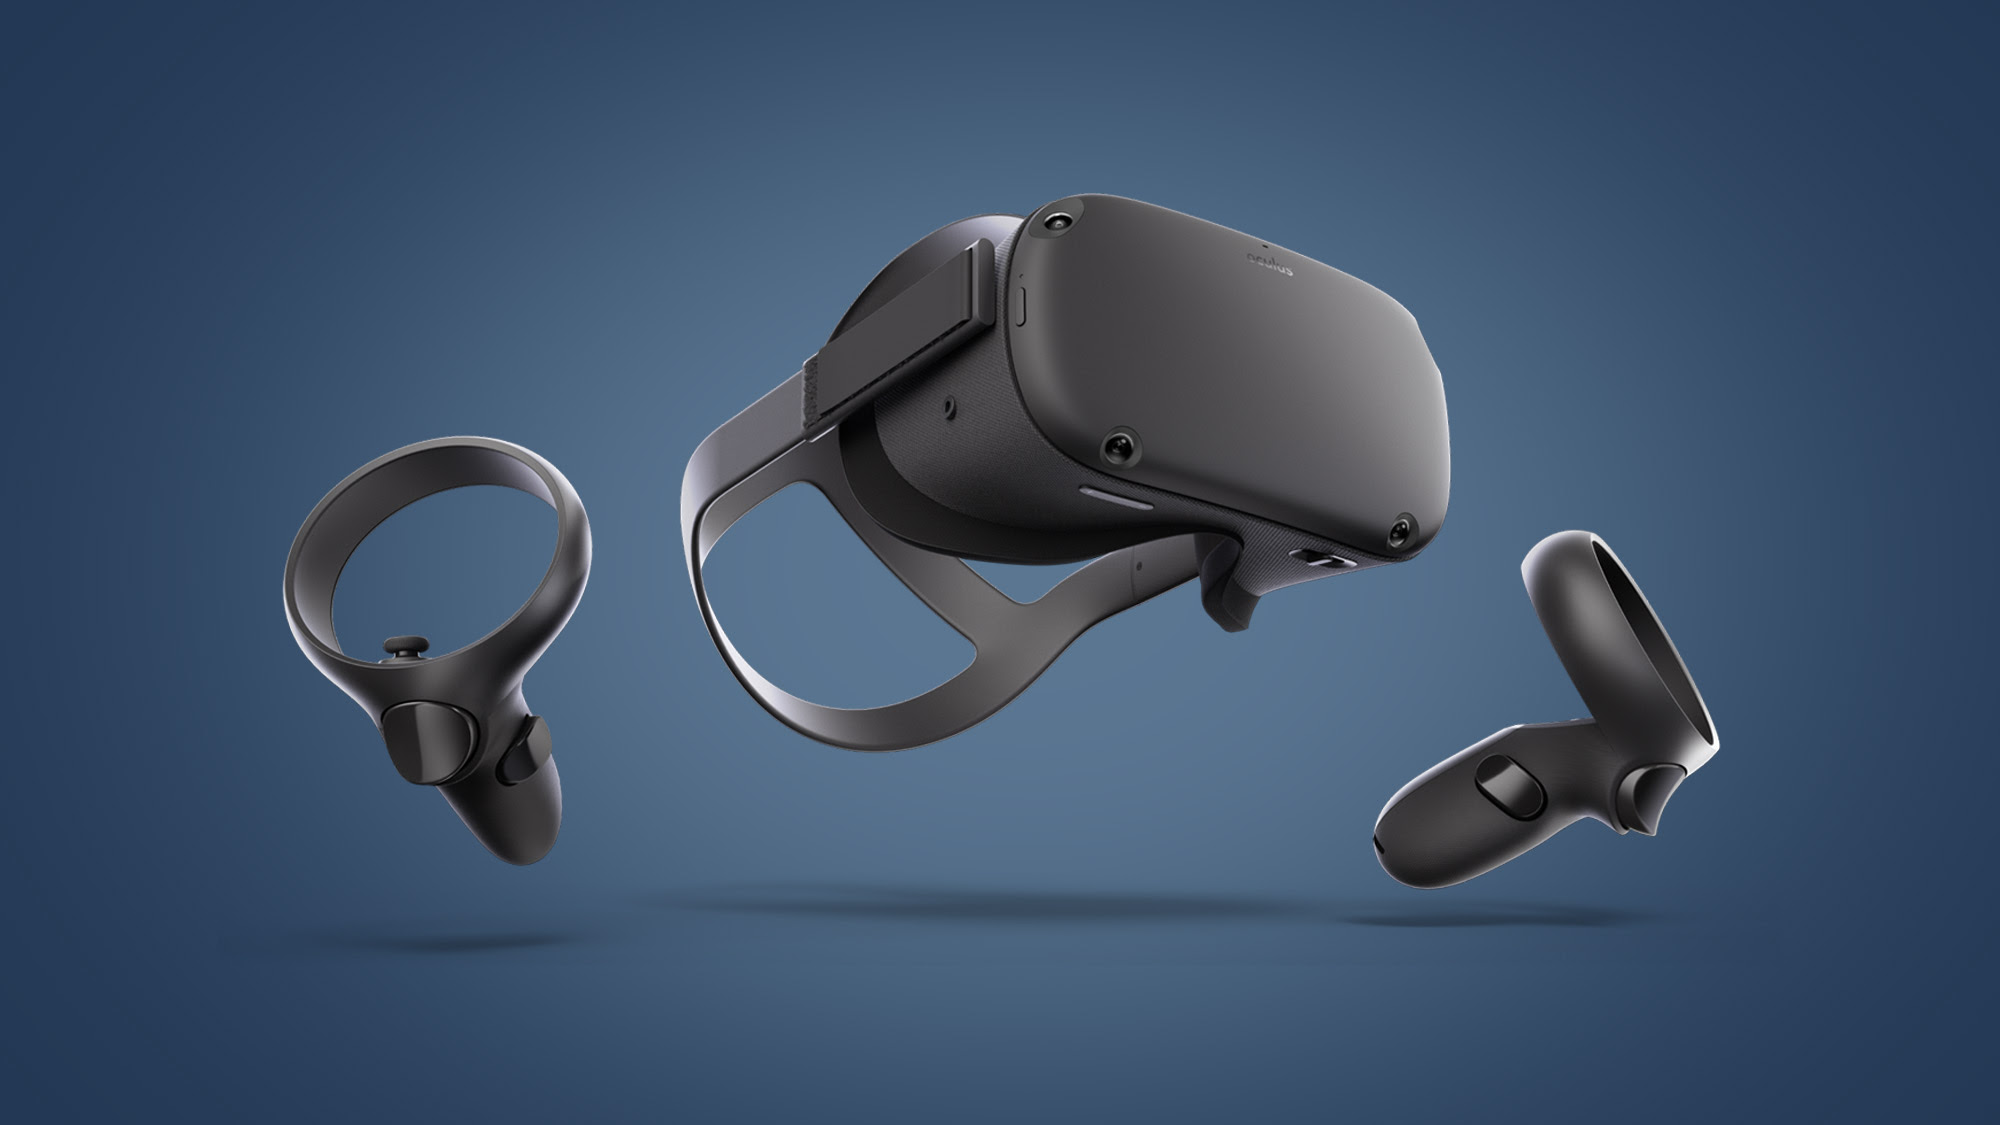 The cheapest Oculus Quest 2 deals in December 2021